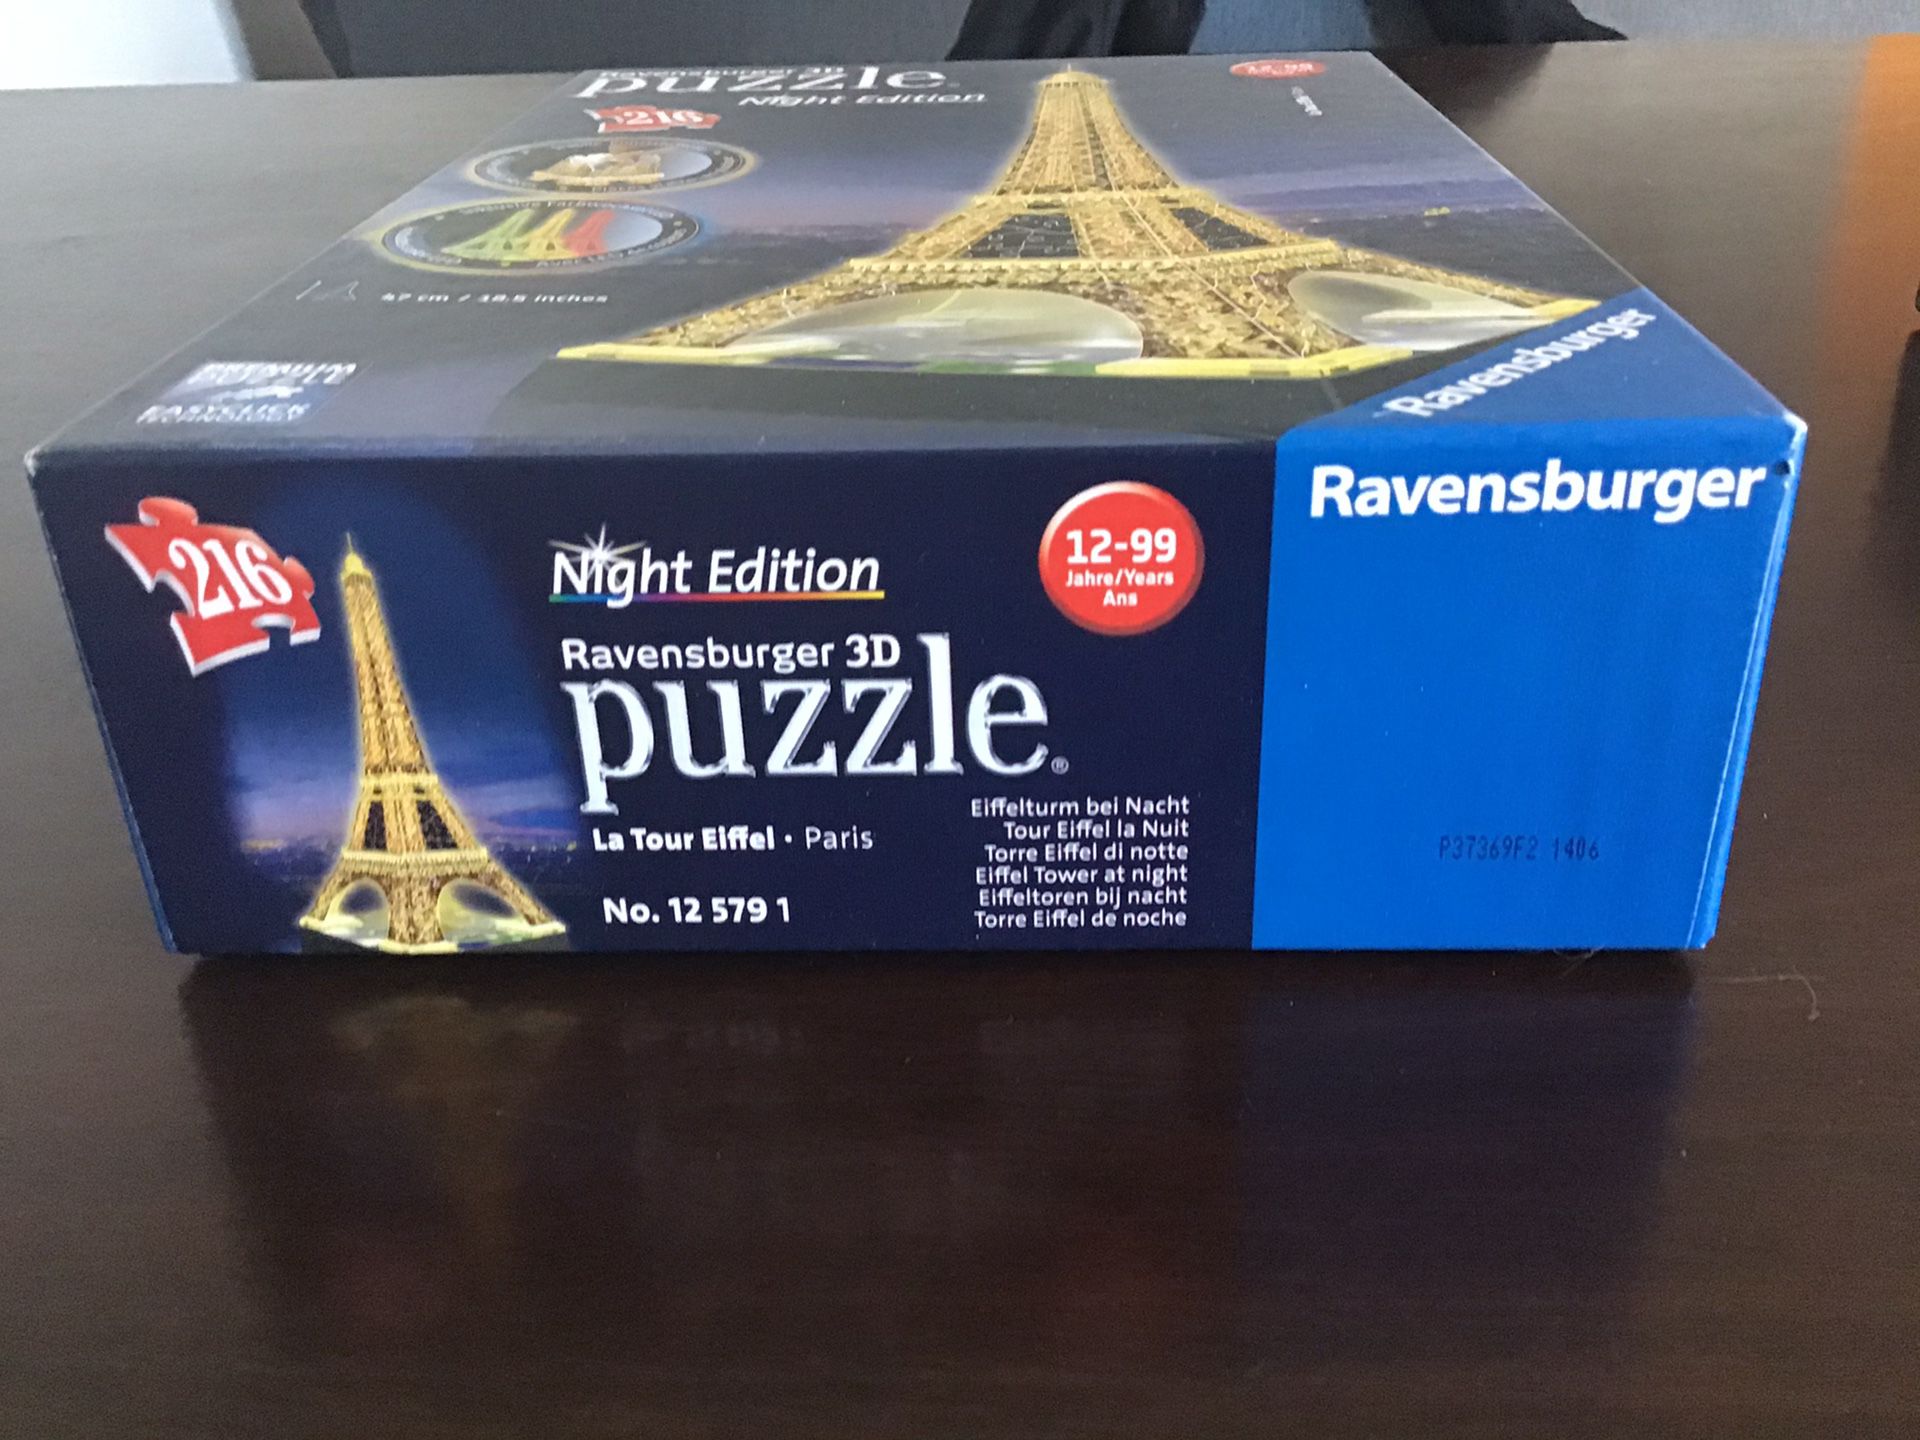 Two 3D puzzles